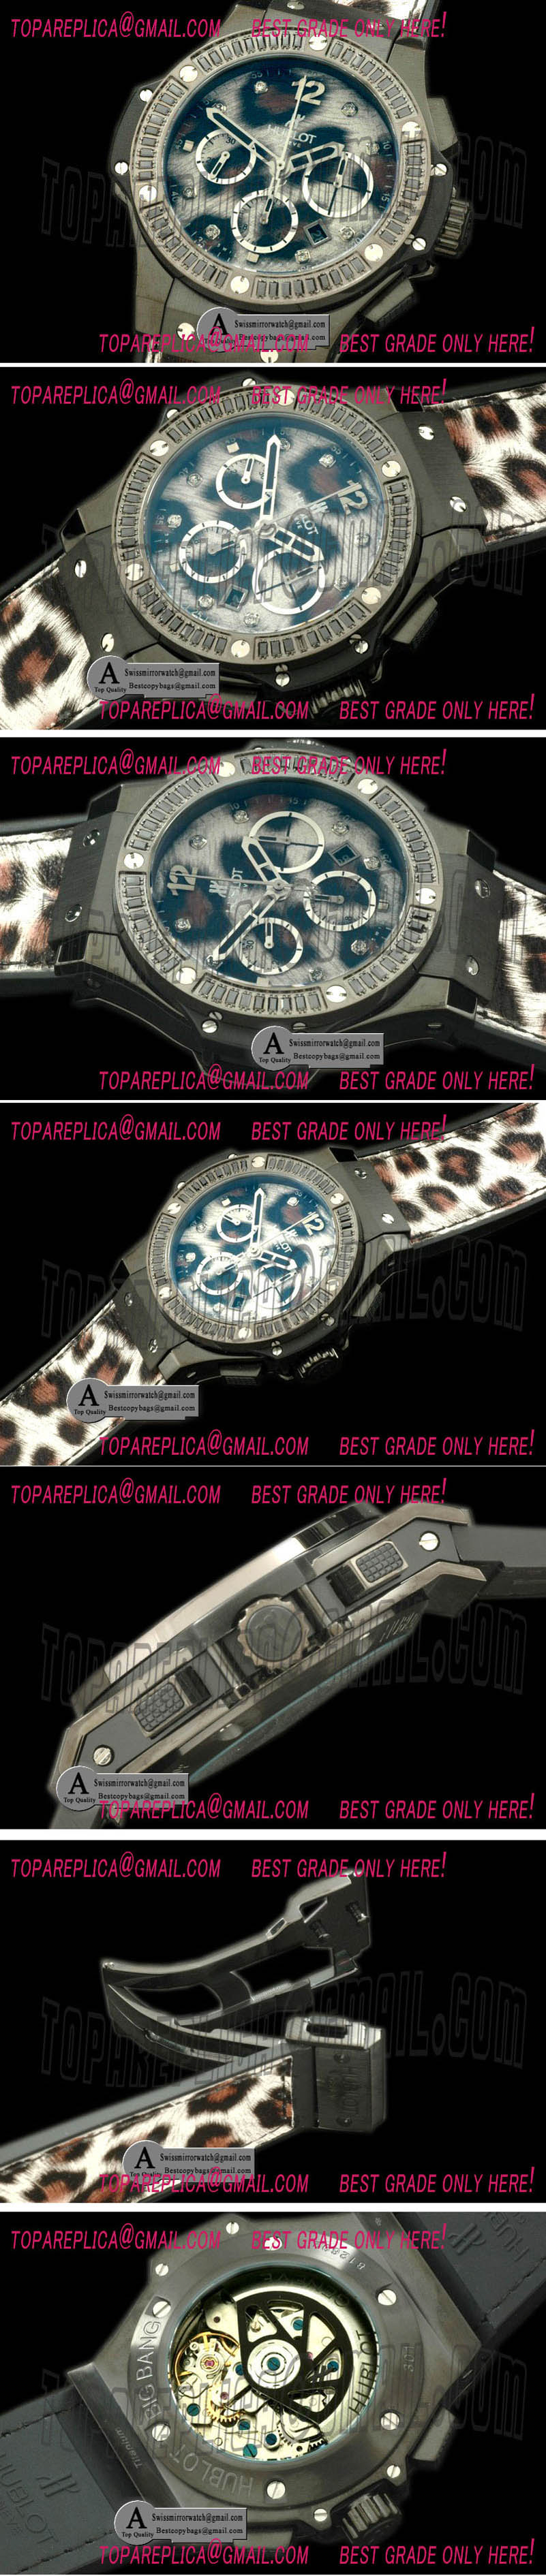 Hublot Leopard Bang PVD Leather A-7750 Replica Watches